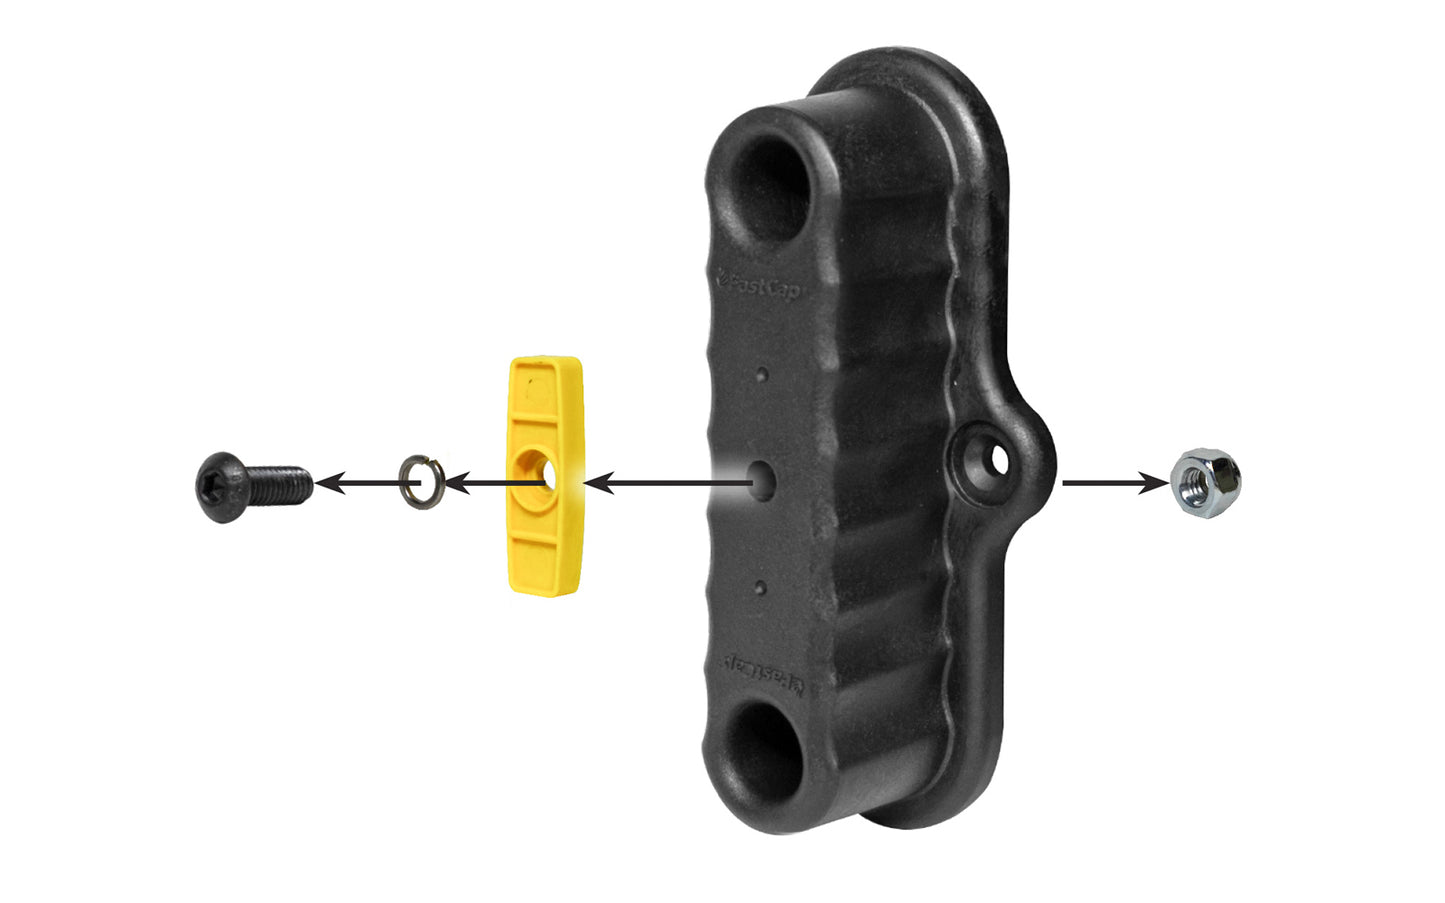 FastCap Level Rack is an innovative solution to securely & safely store your Stabila levels. Mount most Stabila levels vertically or horizontally on drywall, bare studs, garage door panels, trailer walls, or work truck. Cam-lock provides a positive lock that holds your level tight, secure, & rattle-free. 663807030245